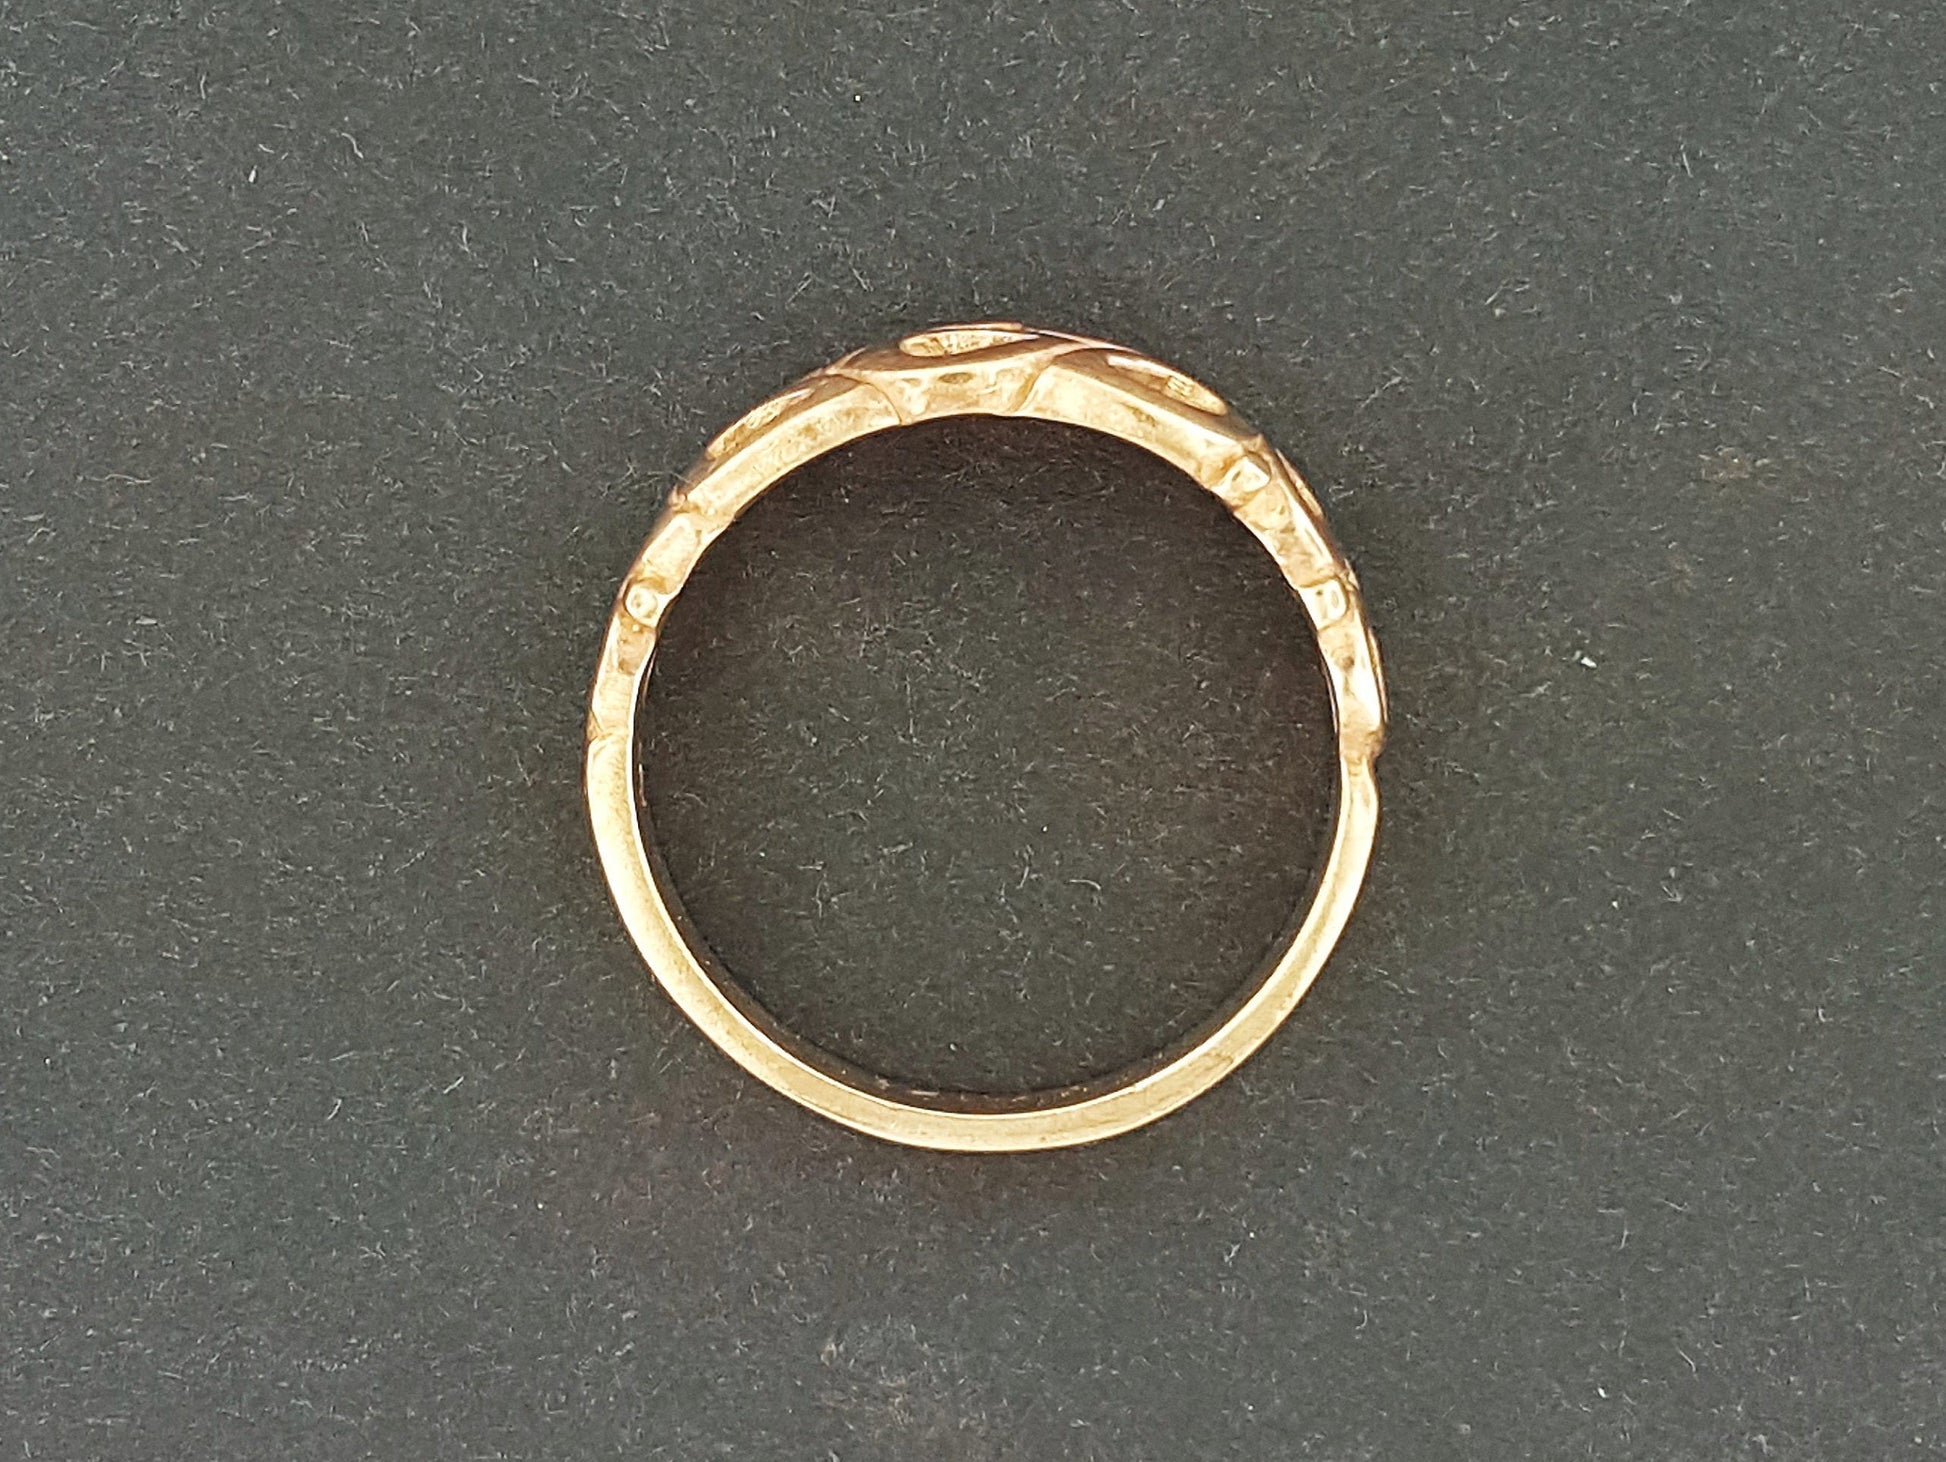 1950s Style Wedding Band in Sterling Silver or Antique Bronze, Retro Style Wedding Band, Vintage Style Bands, Bronze Wedding Band, Retro Style Ring, Bronze Engagement Ring, Bronze Wedding Ring, Antique Bronze Wedding Ring, Antique Bronze Band